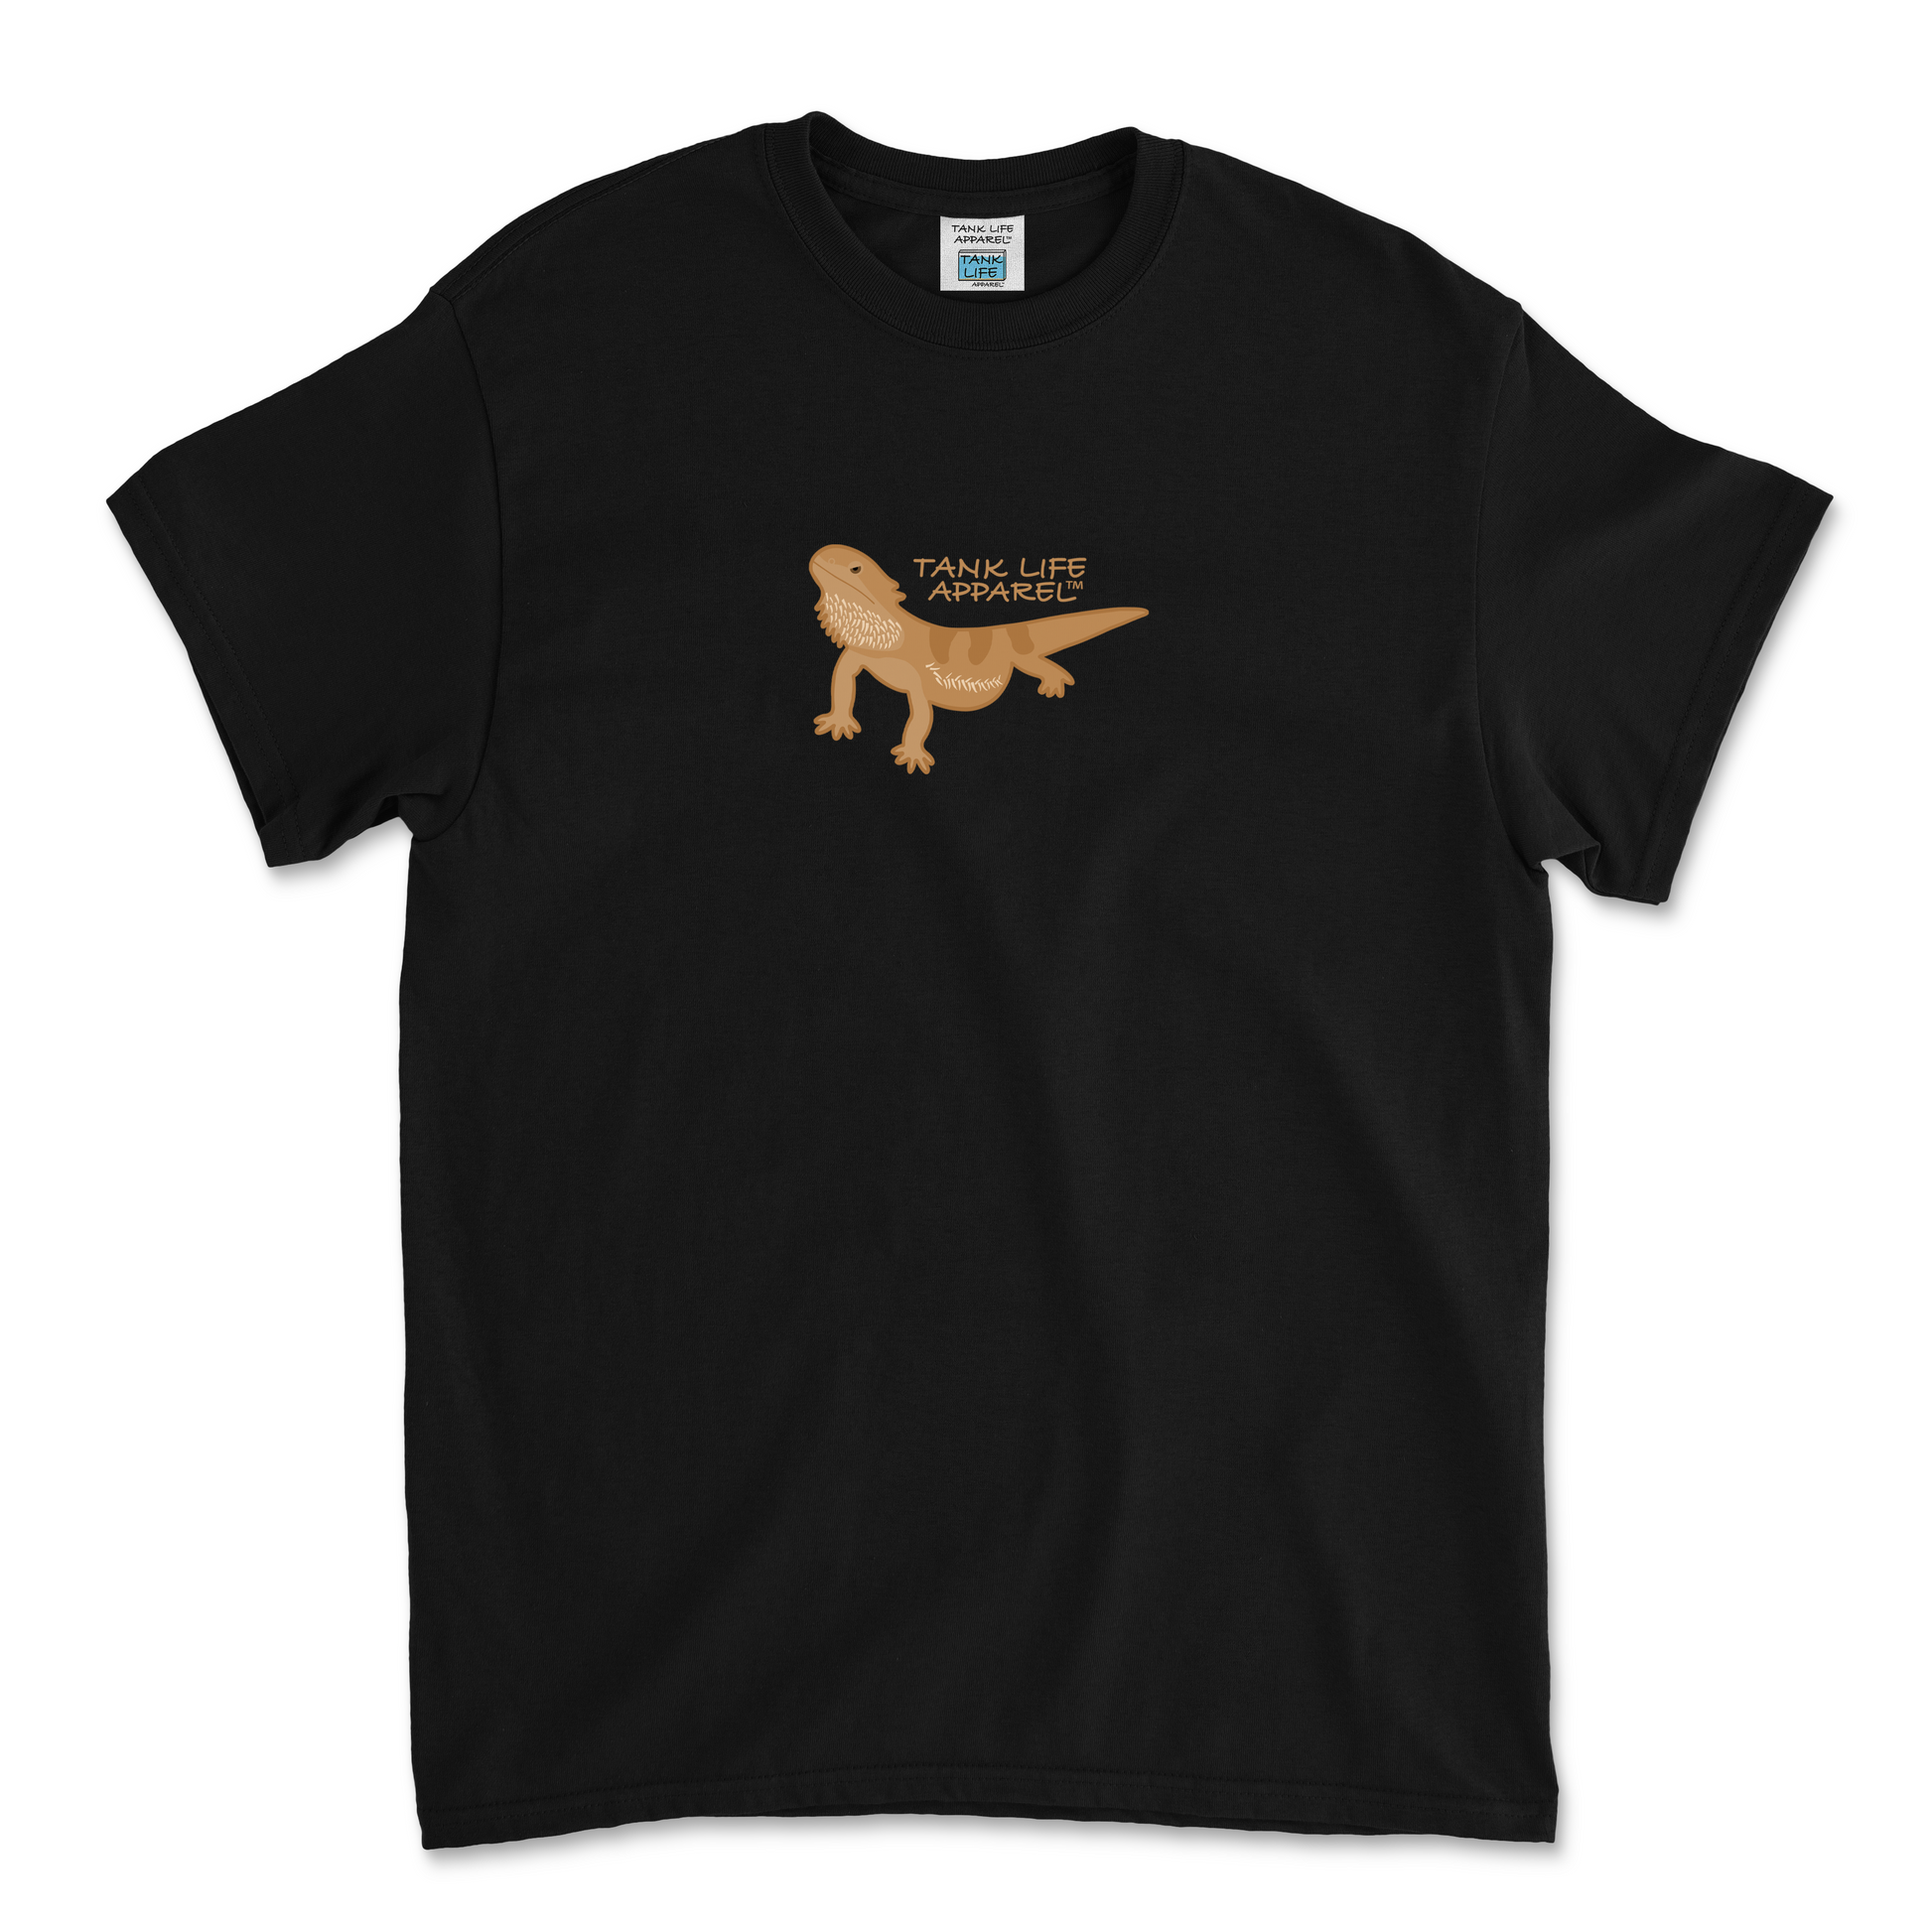 The Tank Life Apparel bearded dragon design on a youth tee.